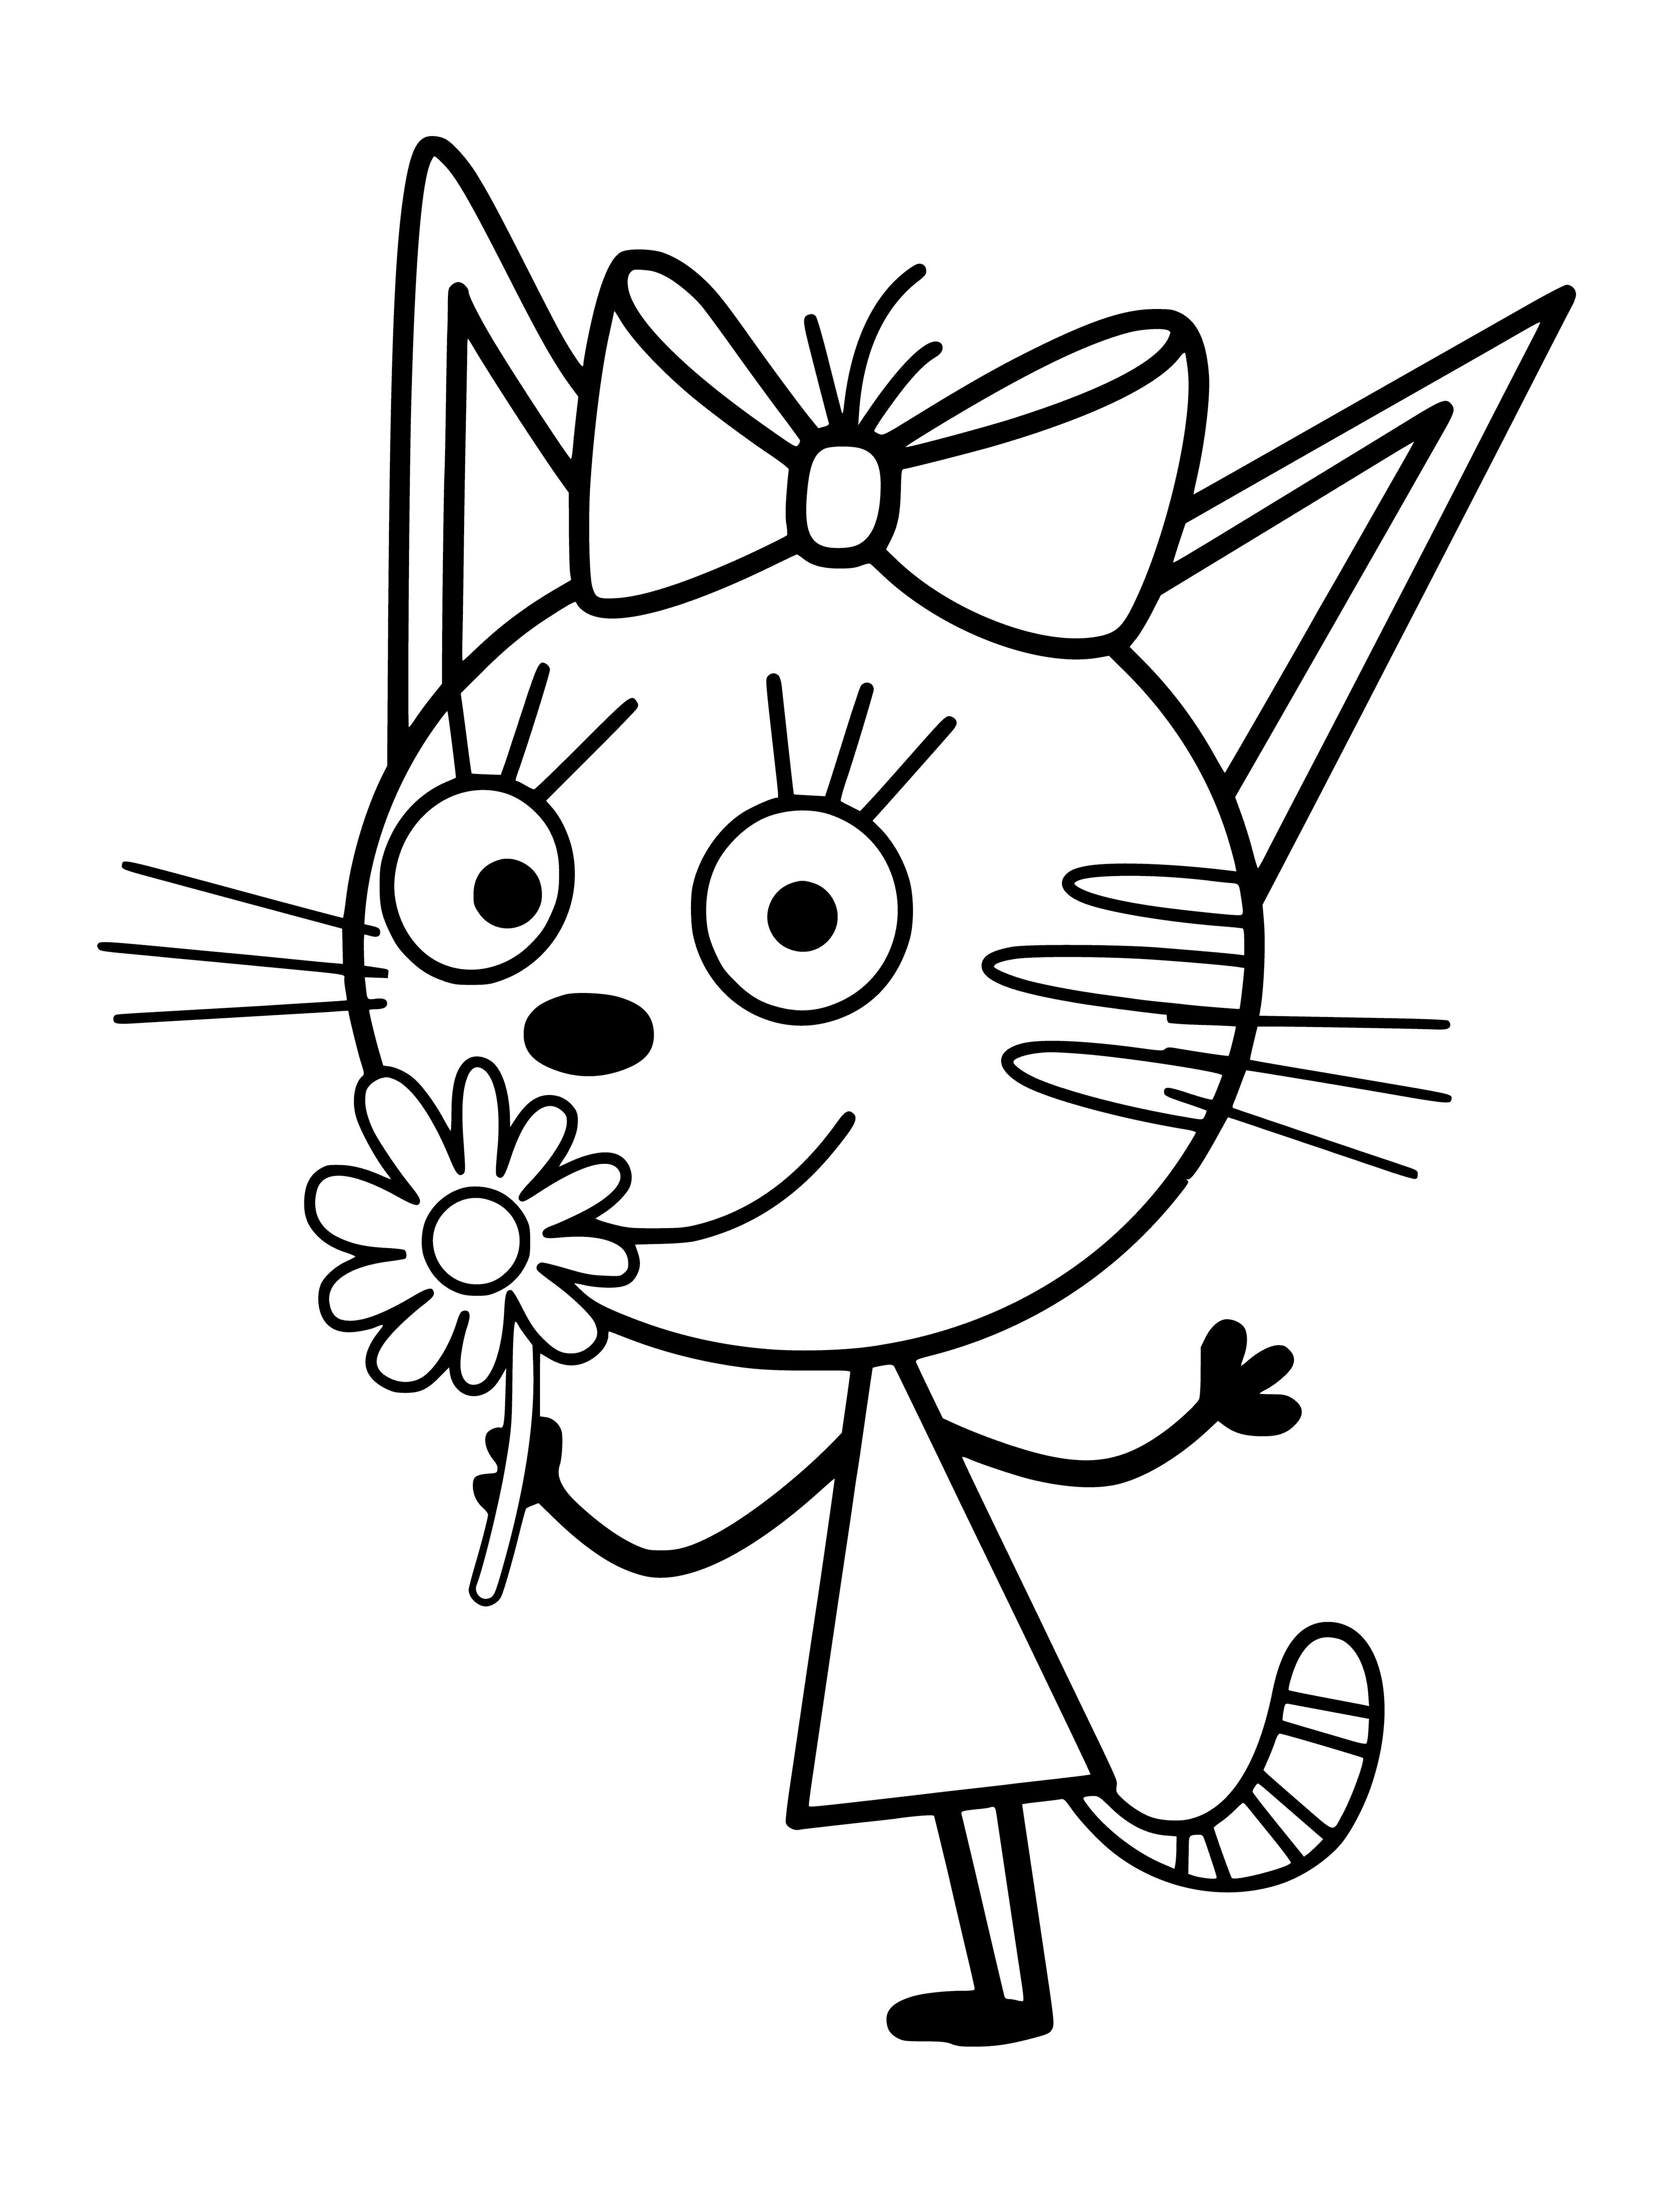 Two cats watch as a light brown one leans over a pink flower. All have different colored eyes and expressions, from serious to playful.